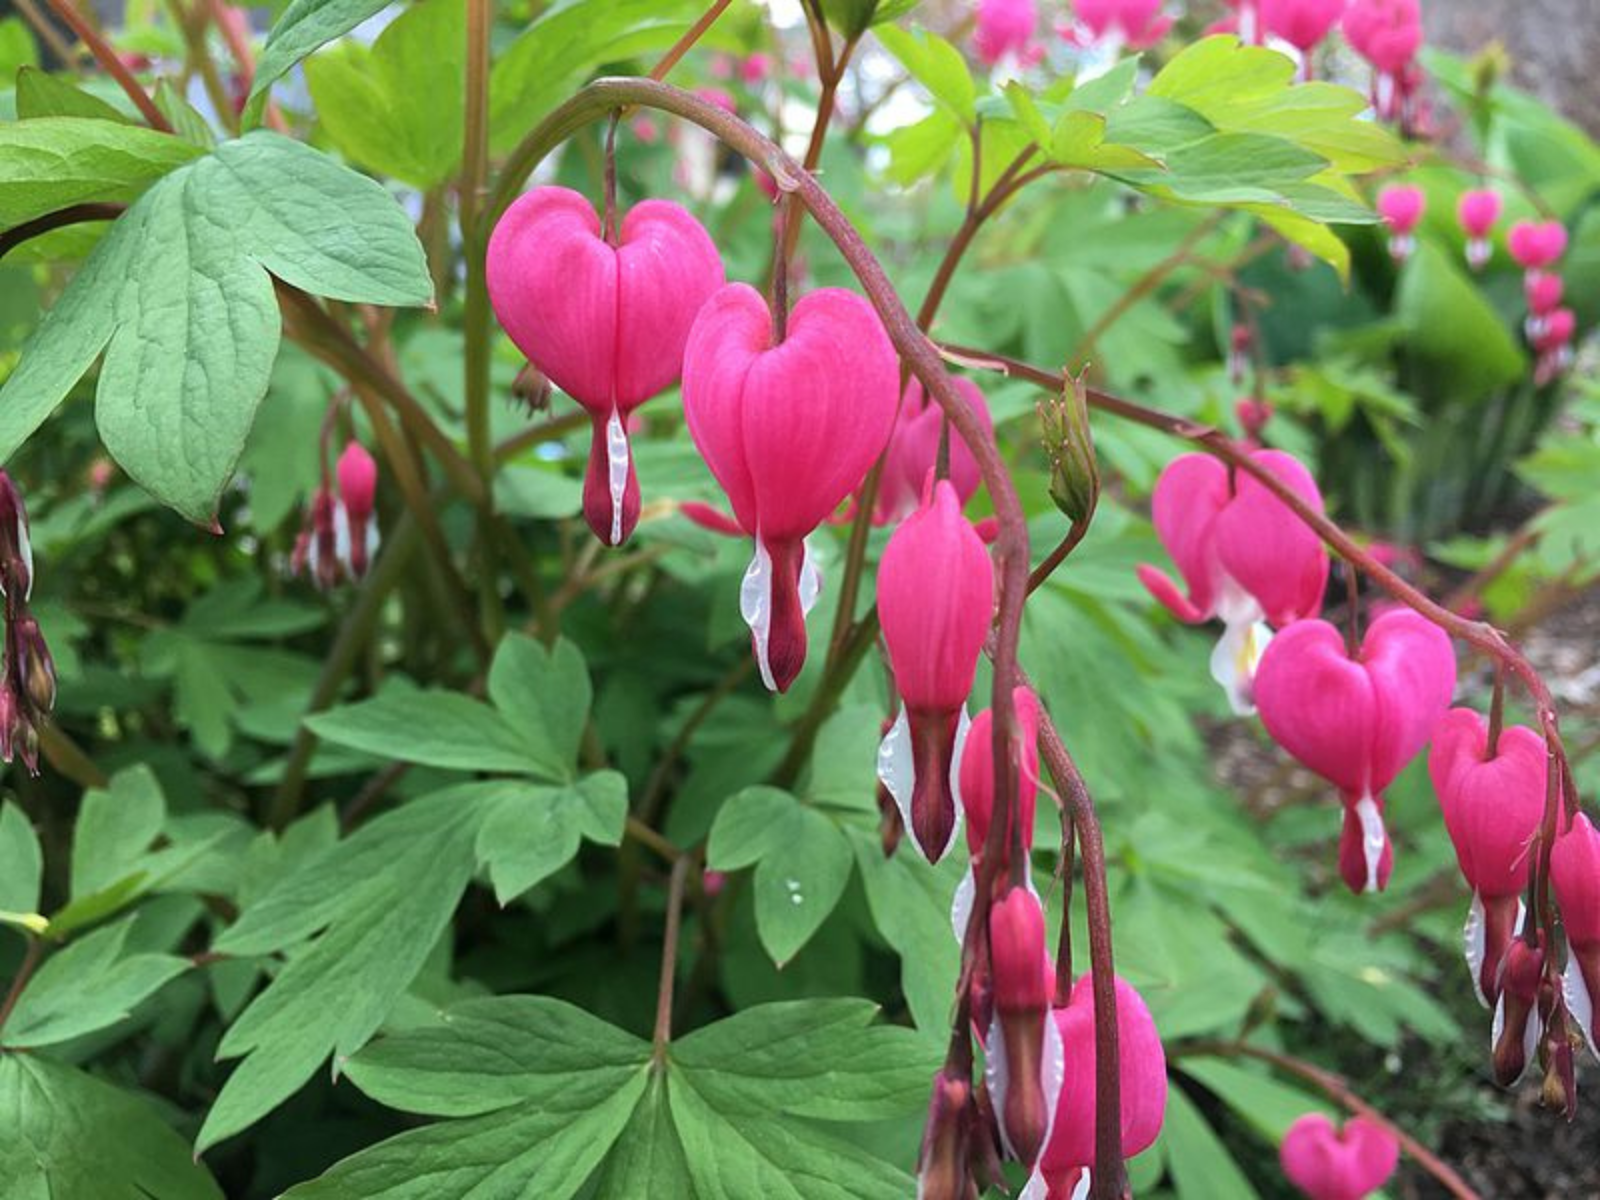 Close-up on a branch of Bleeding hear. Long drooping branches with deep pink, heart-shaped flowers hanging off of them.